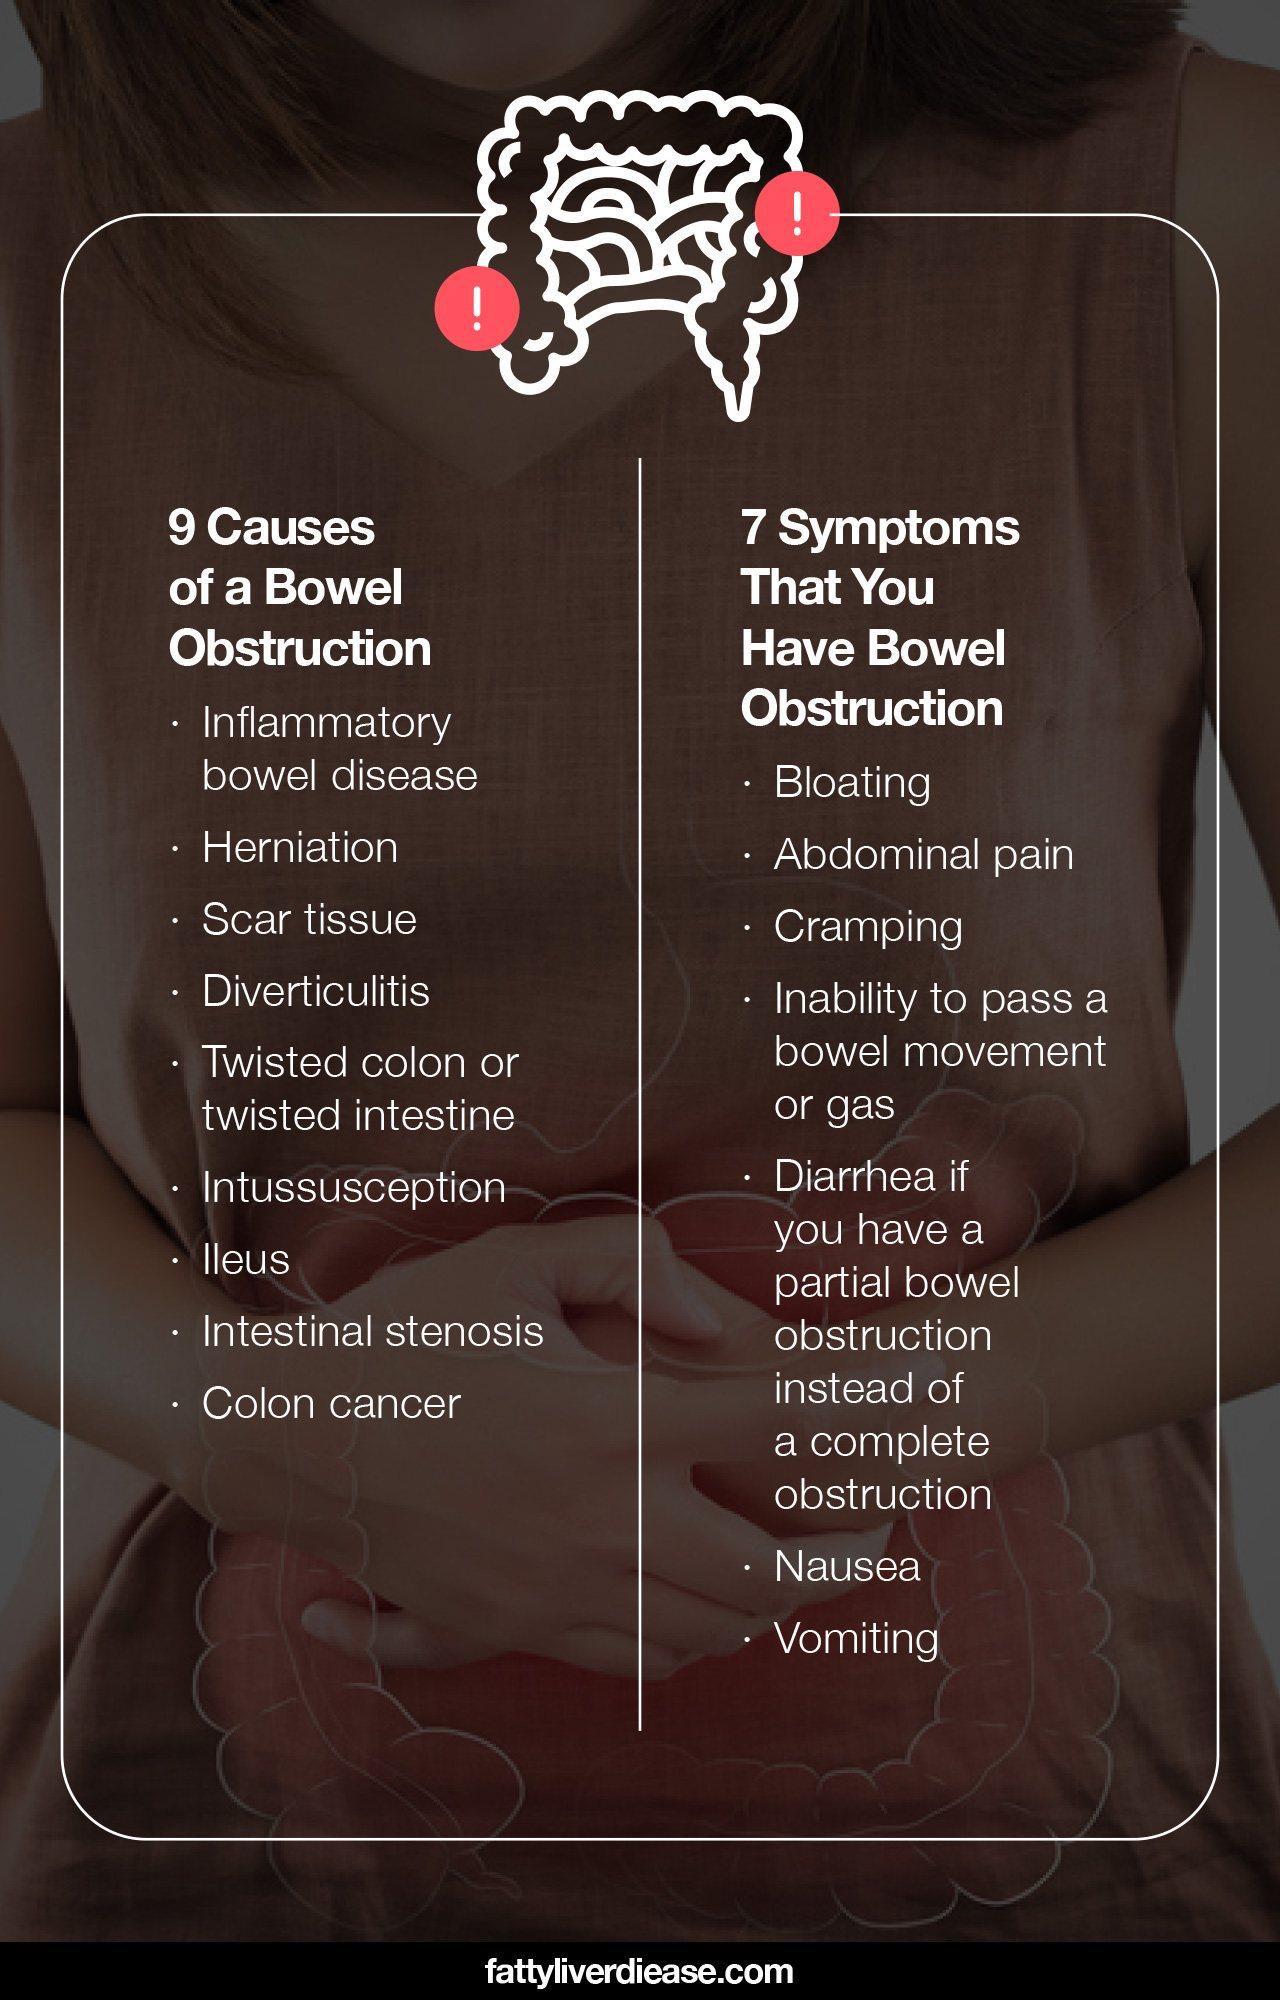 9 Causes of a Bowel Obstruction